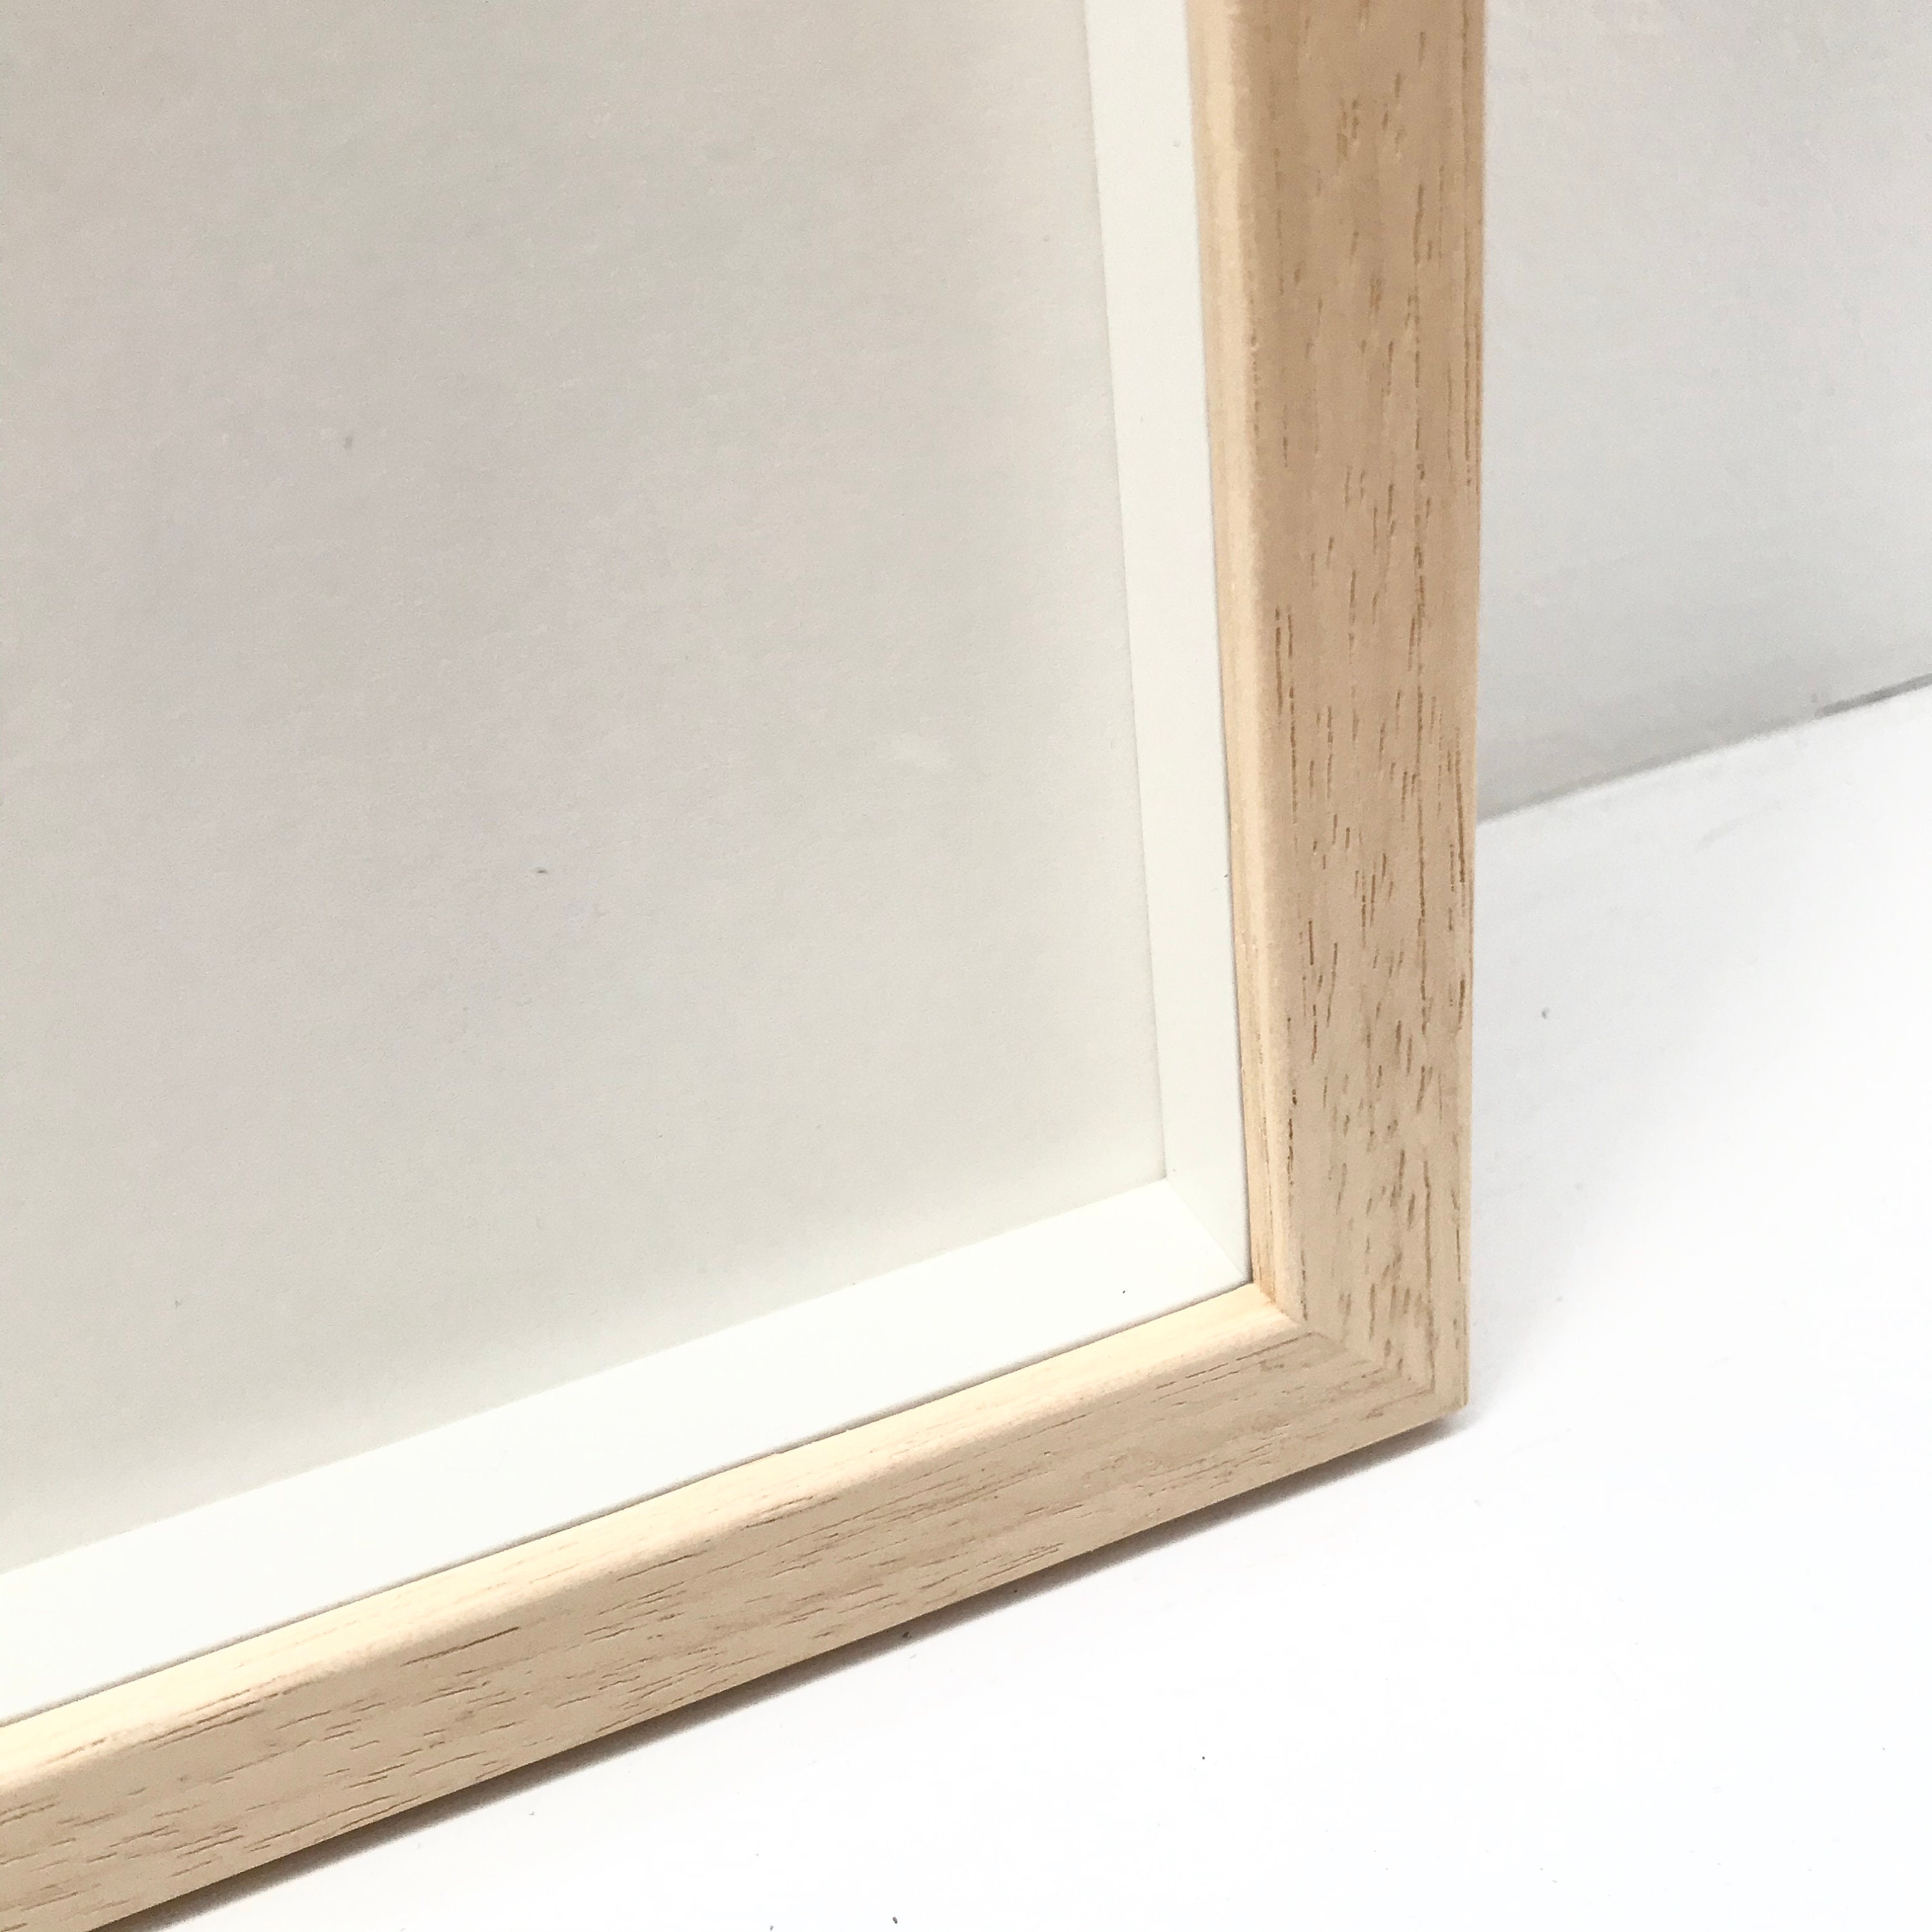 framing - What woods are soft enough for glazier points